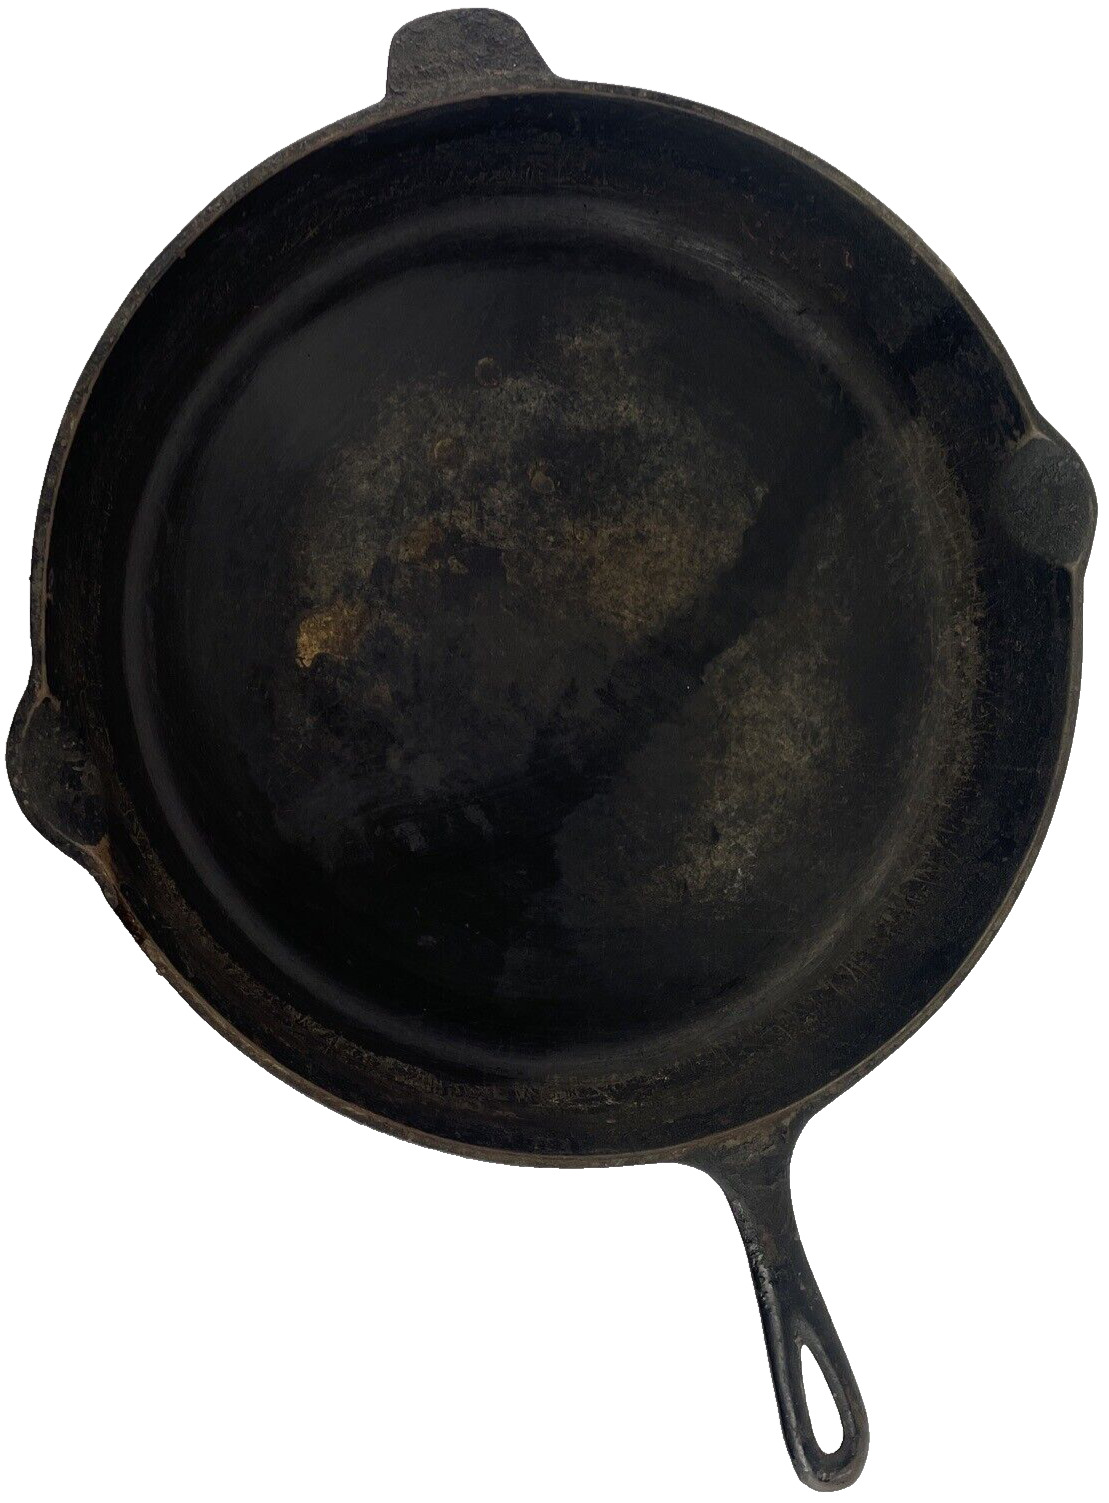 Vintage #14 - 14 ( U.S ) Made in the U.S.A. Cast Iron Skillet Fry Frying Pan